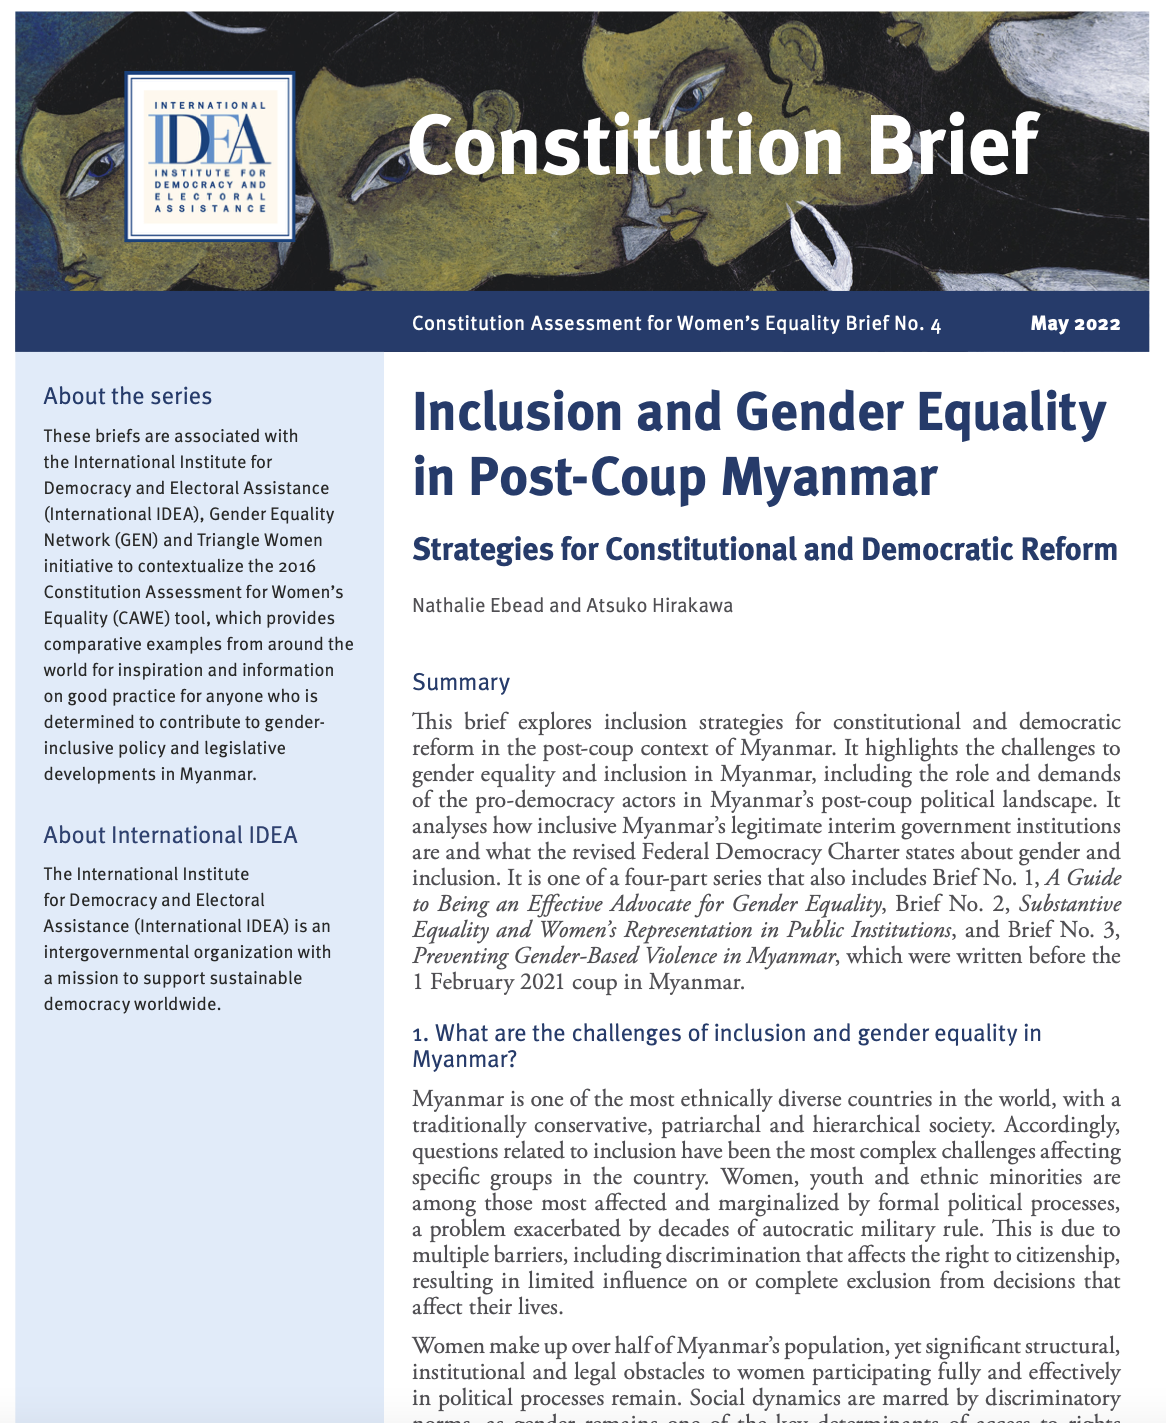 INCLUSION AND GENDER EQUALITY IN POST-COUP MYANMAR: STRATEGIES FOR CONSTITUTIONAL AND DEMOCRATIC REFORM